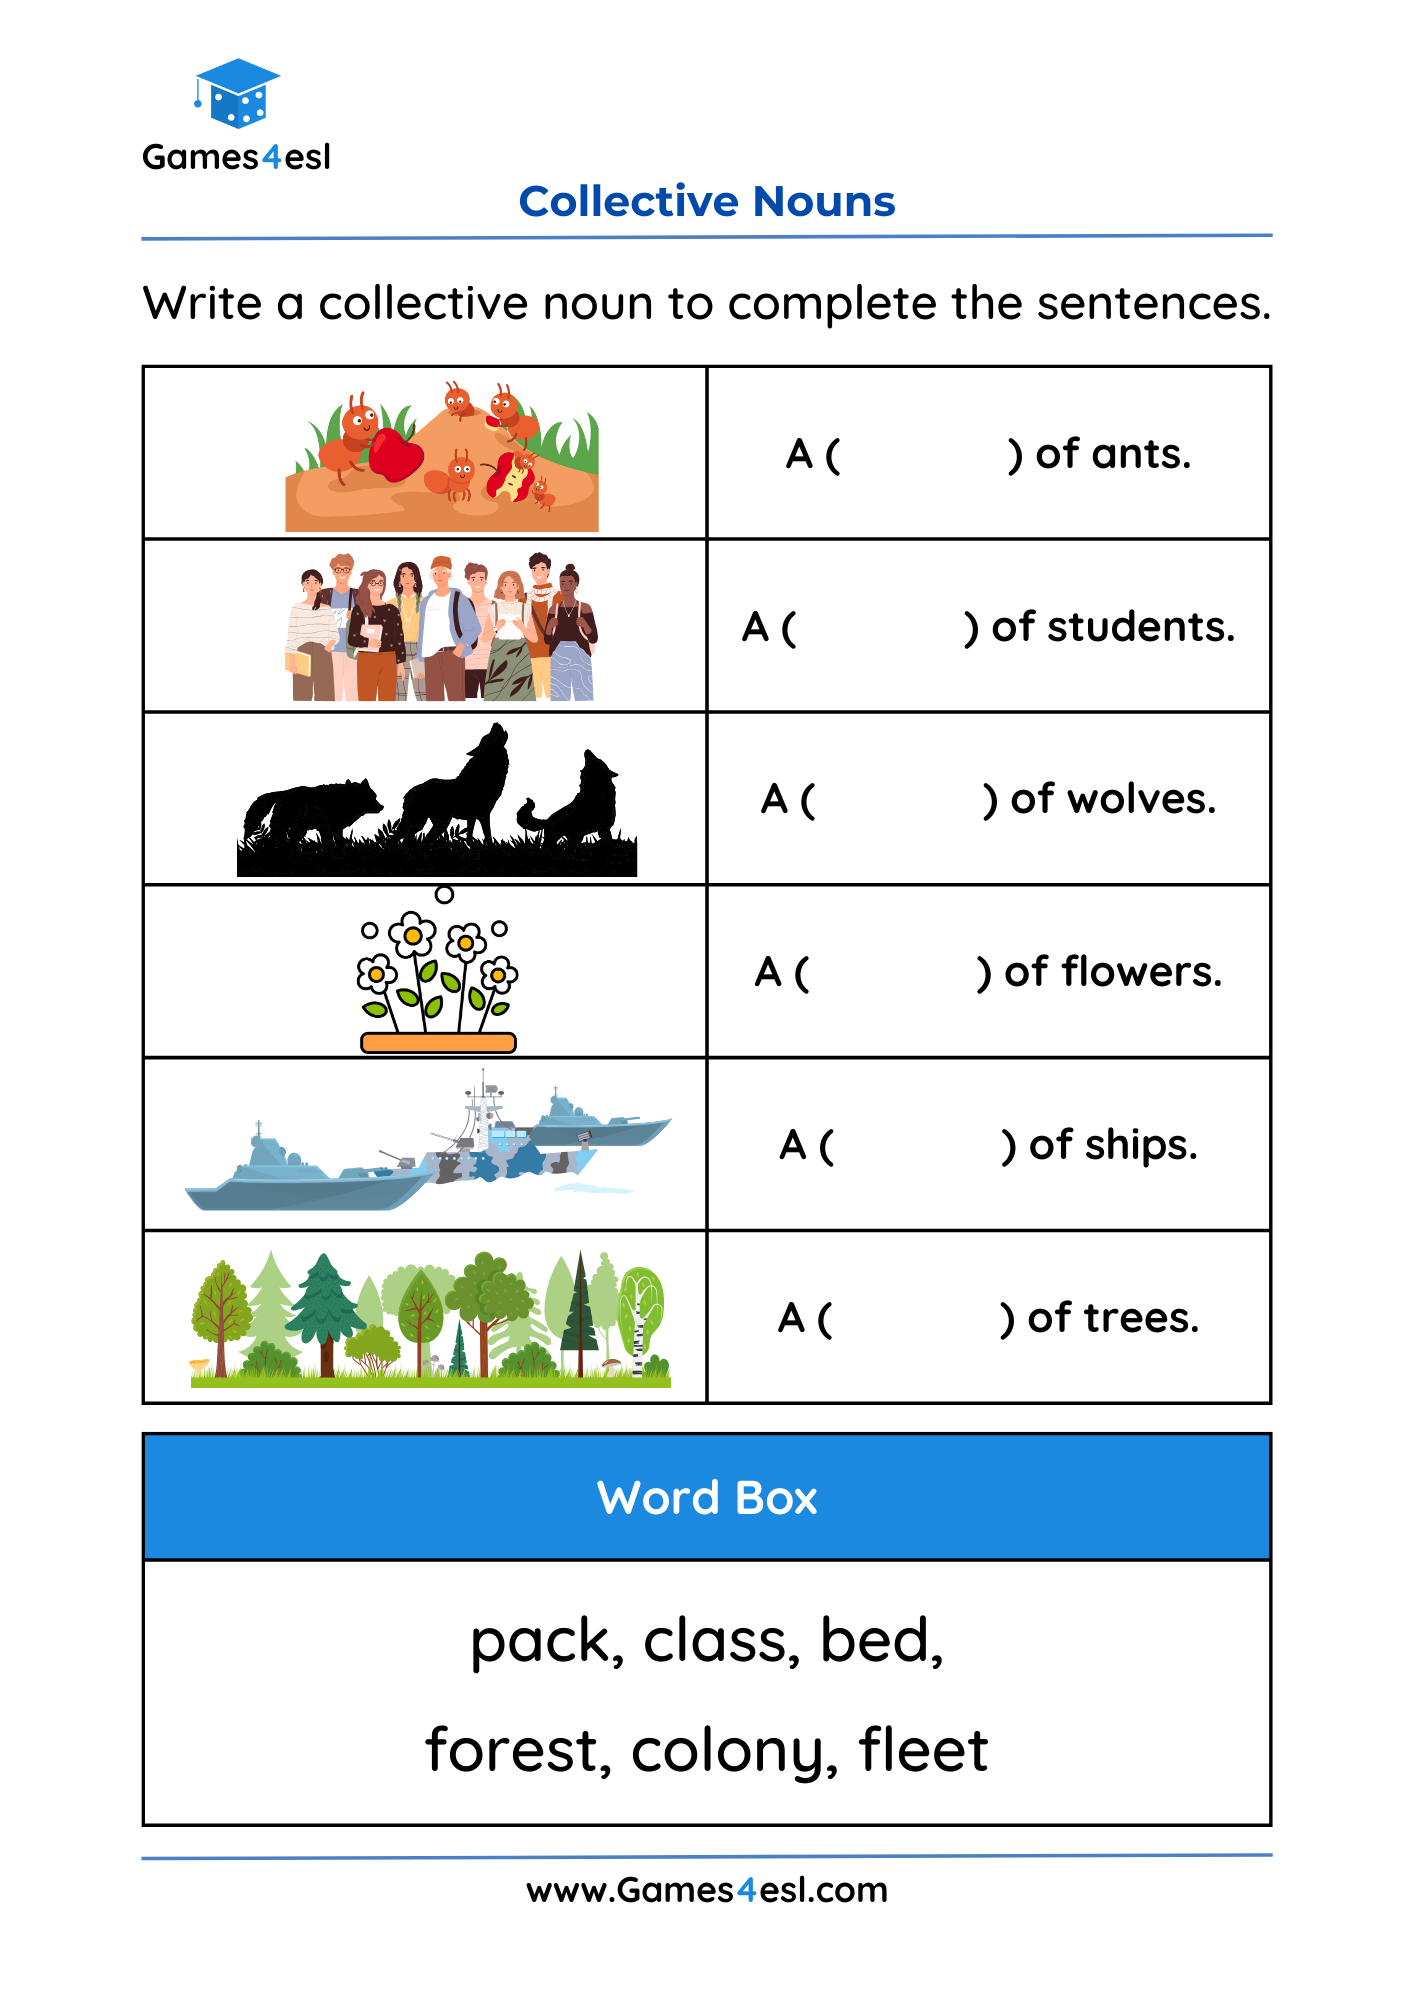 A worksheet for teaching collective nouns in English.